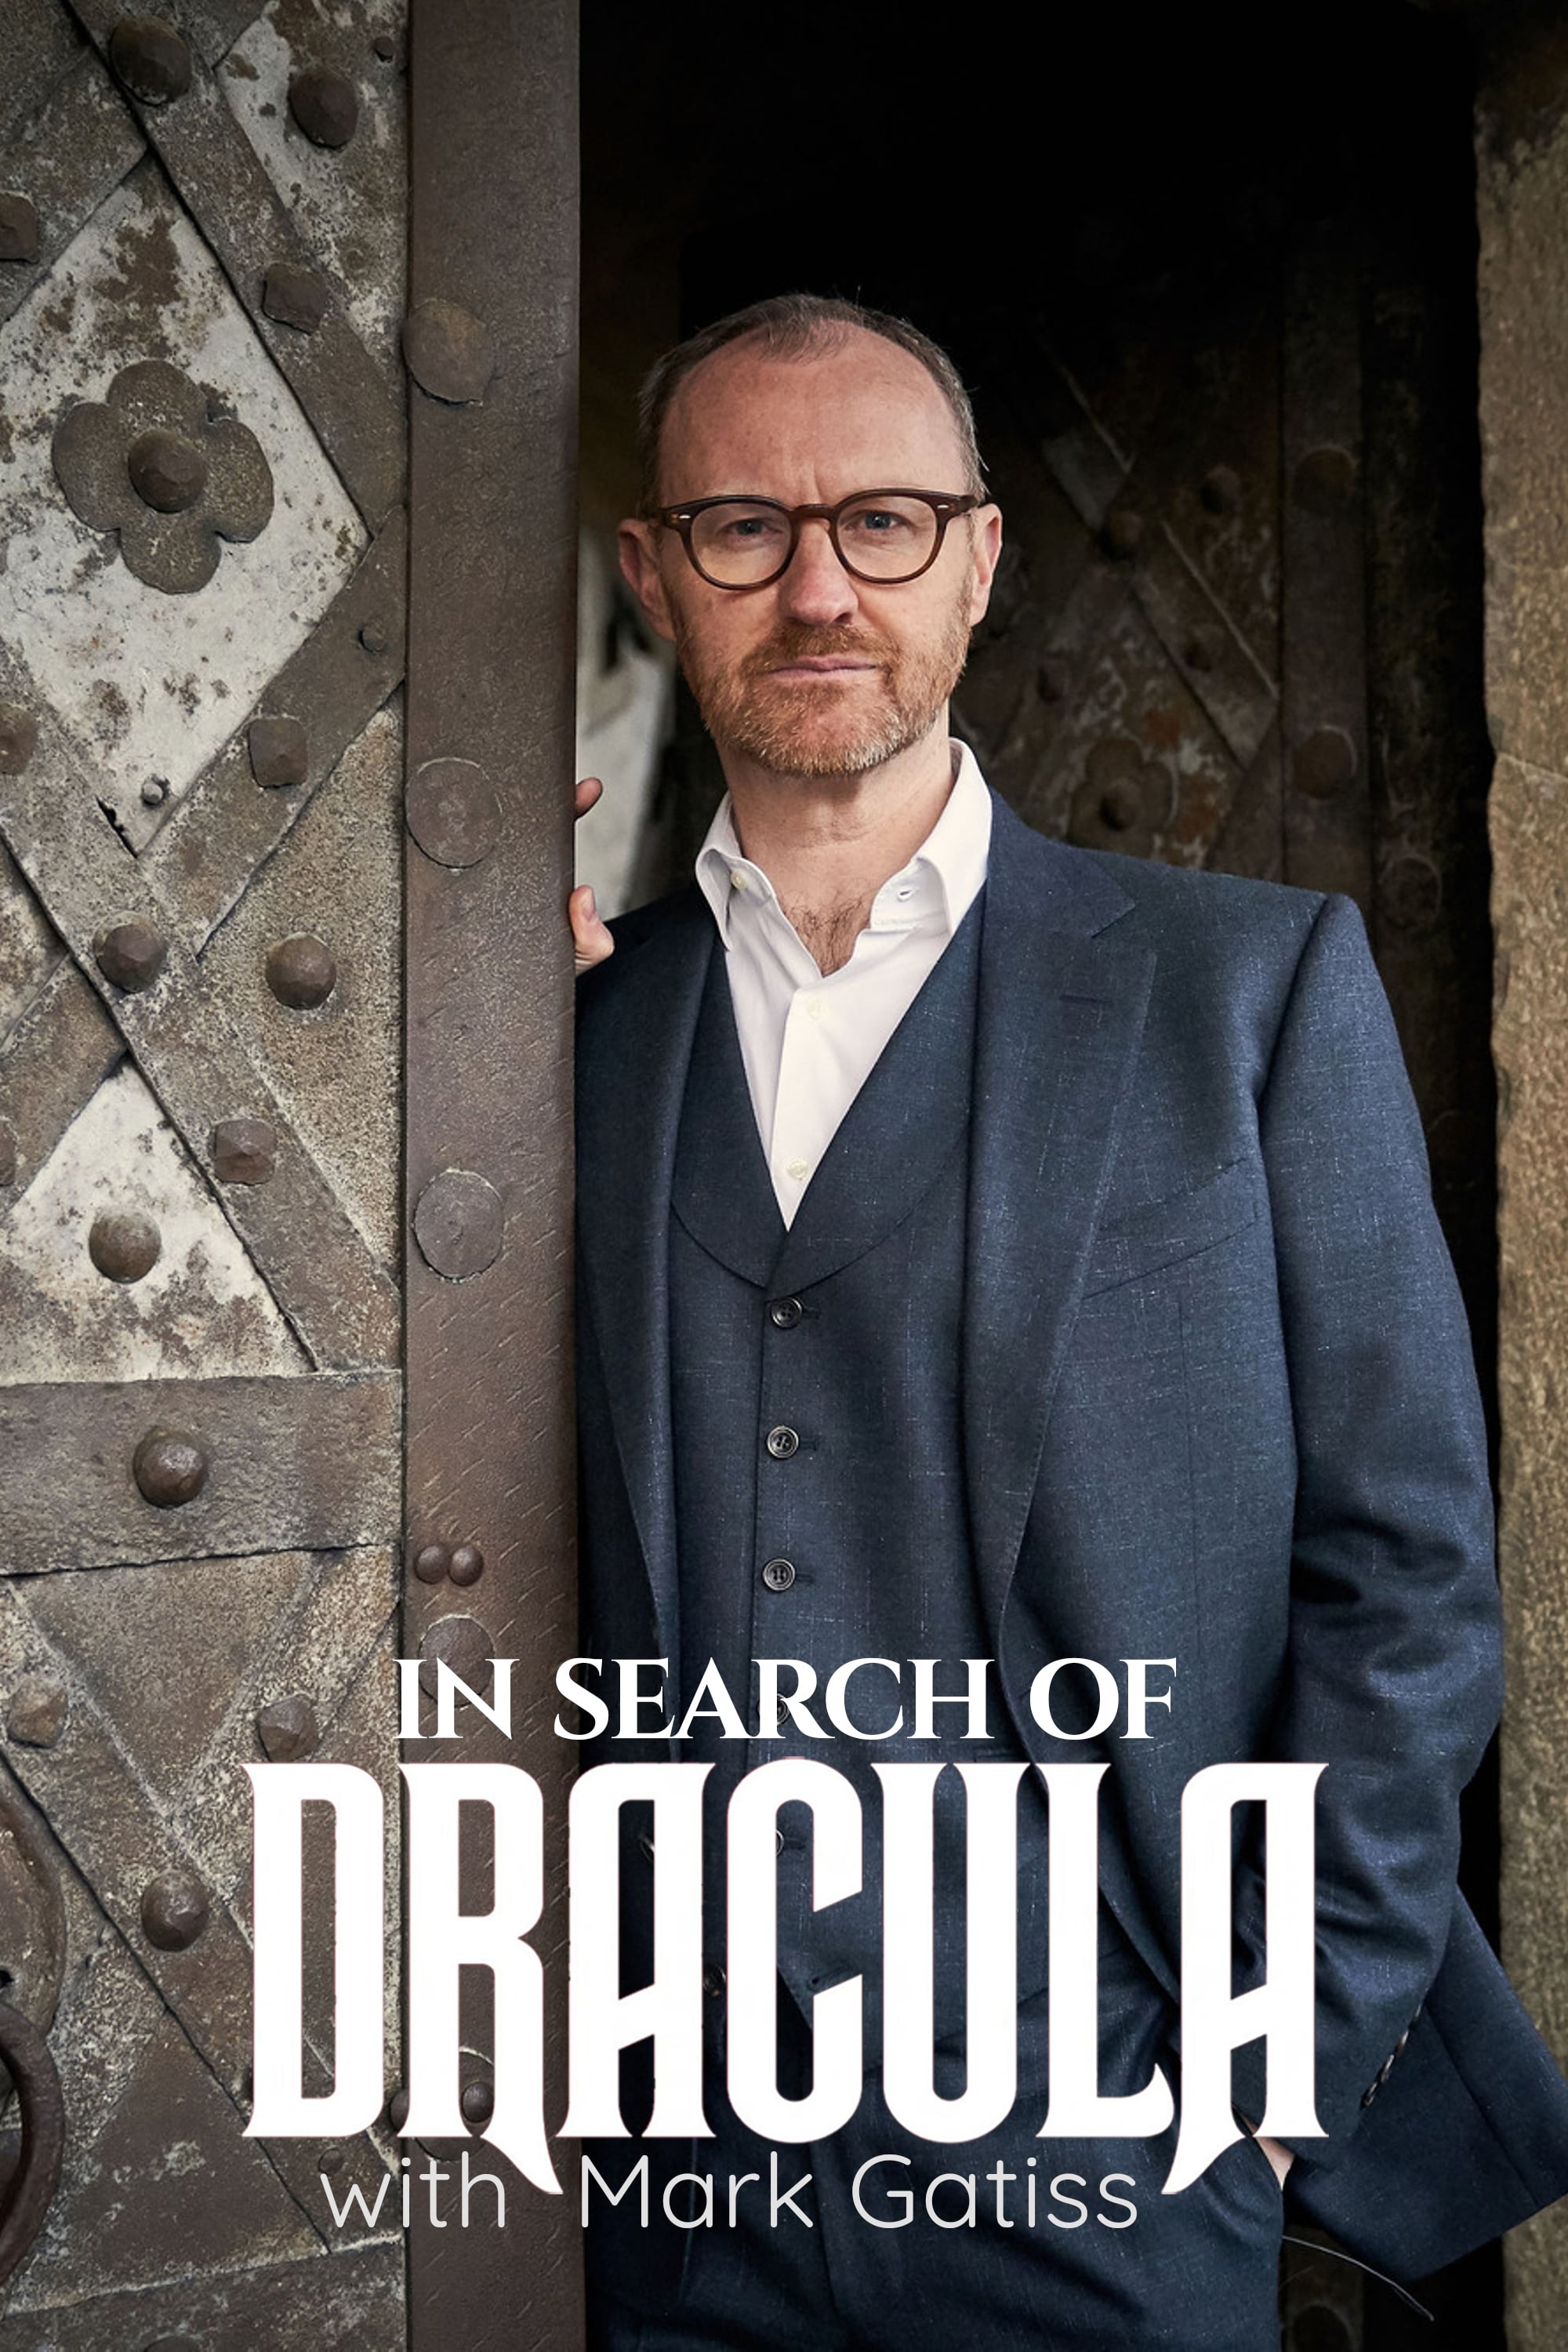 In Search of Dracula with Mark Gatiss (2020)